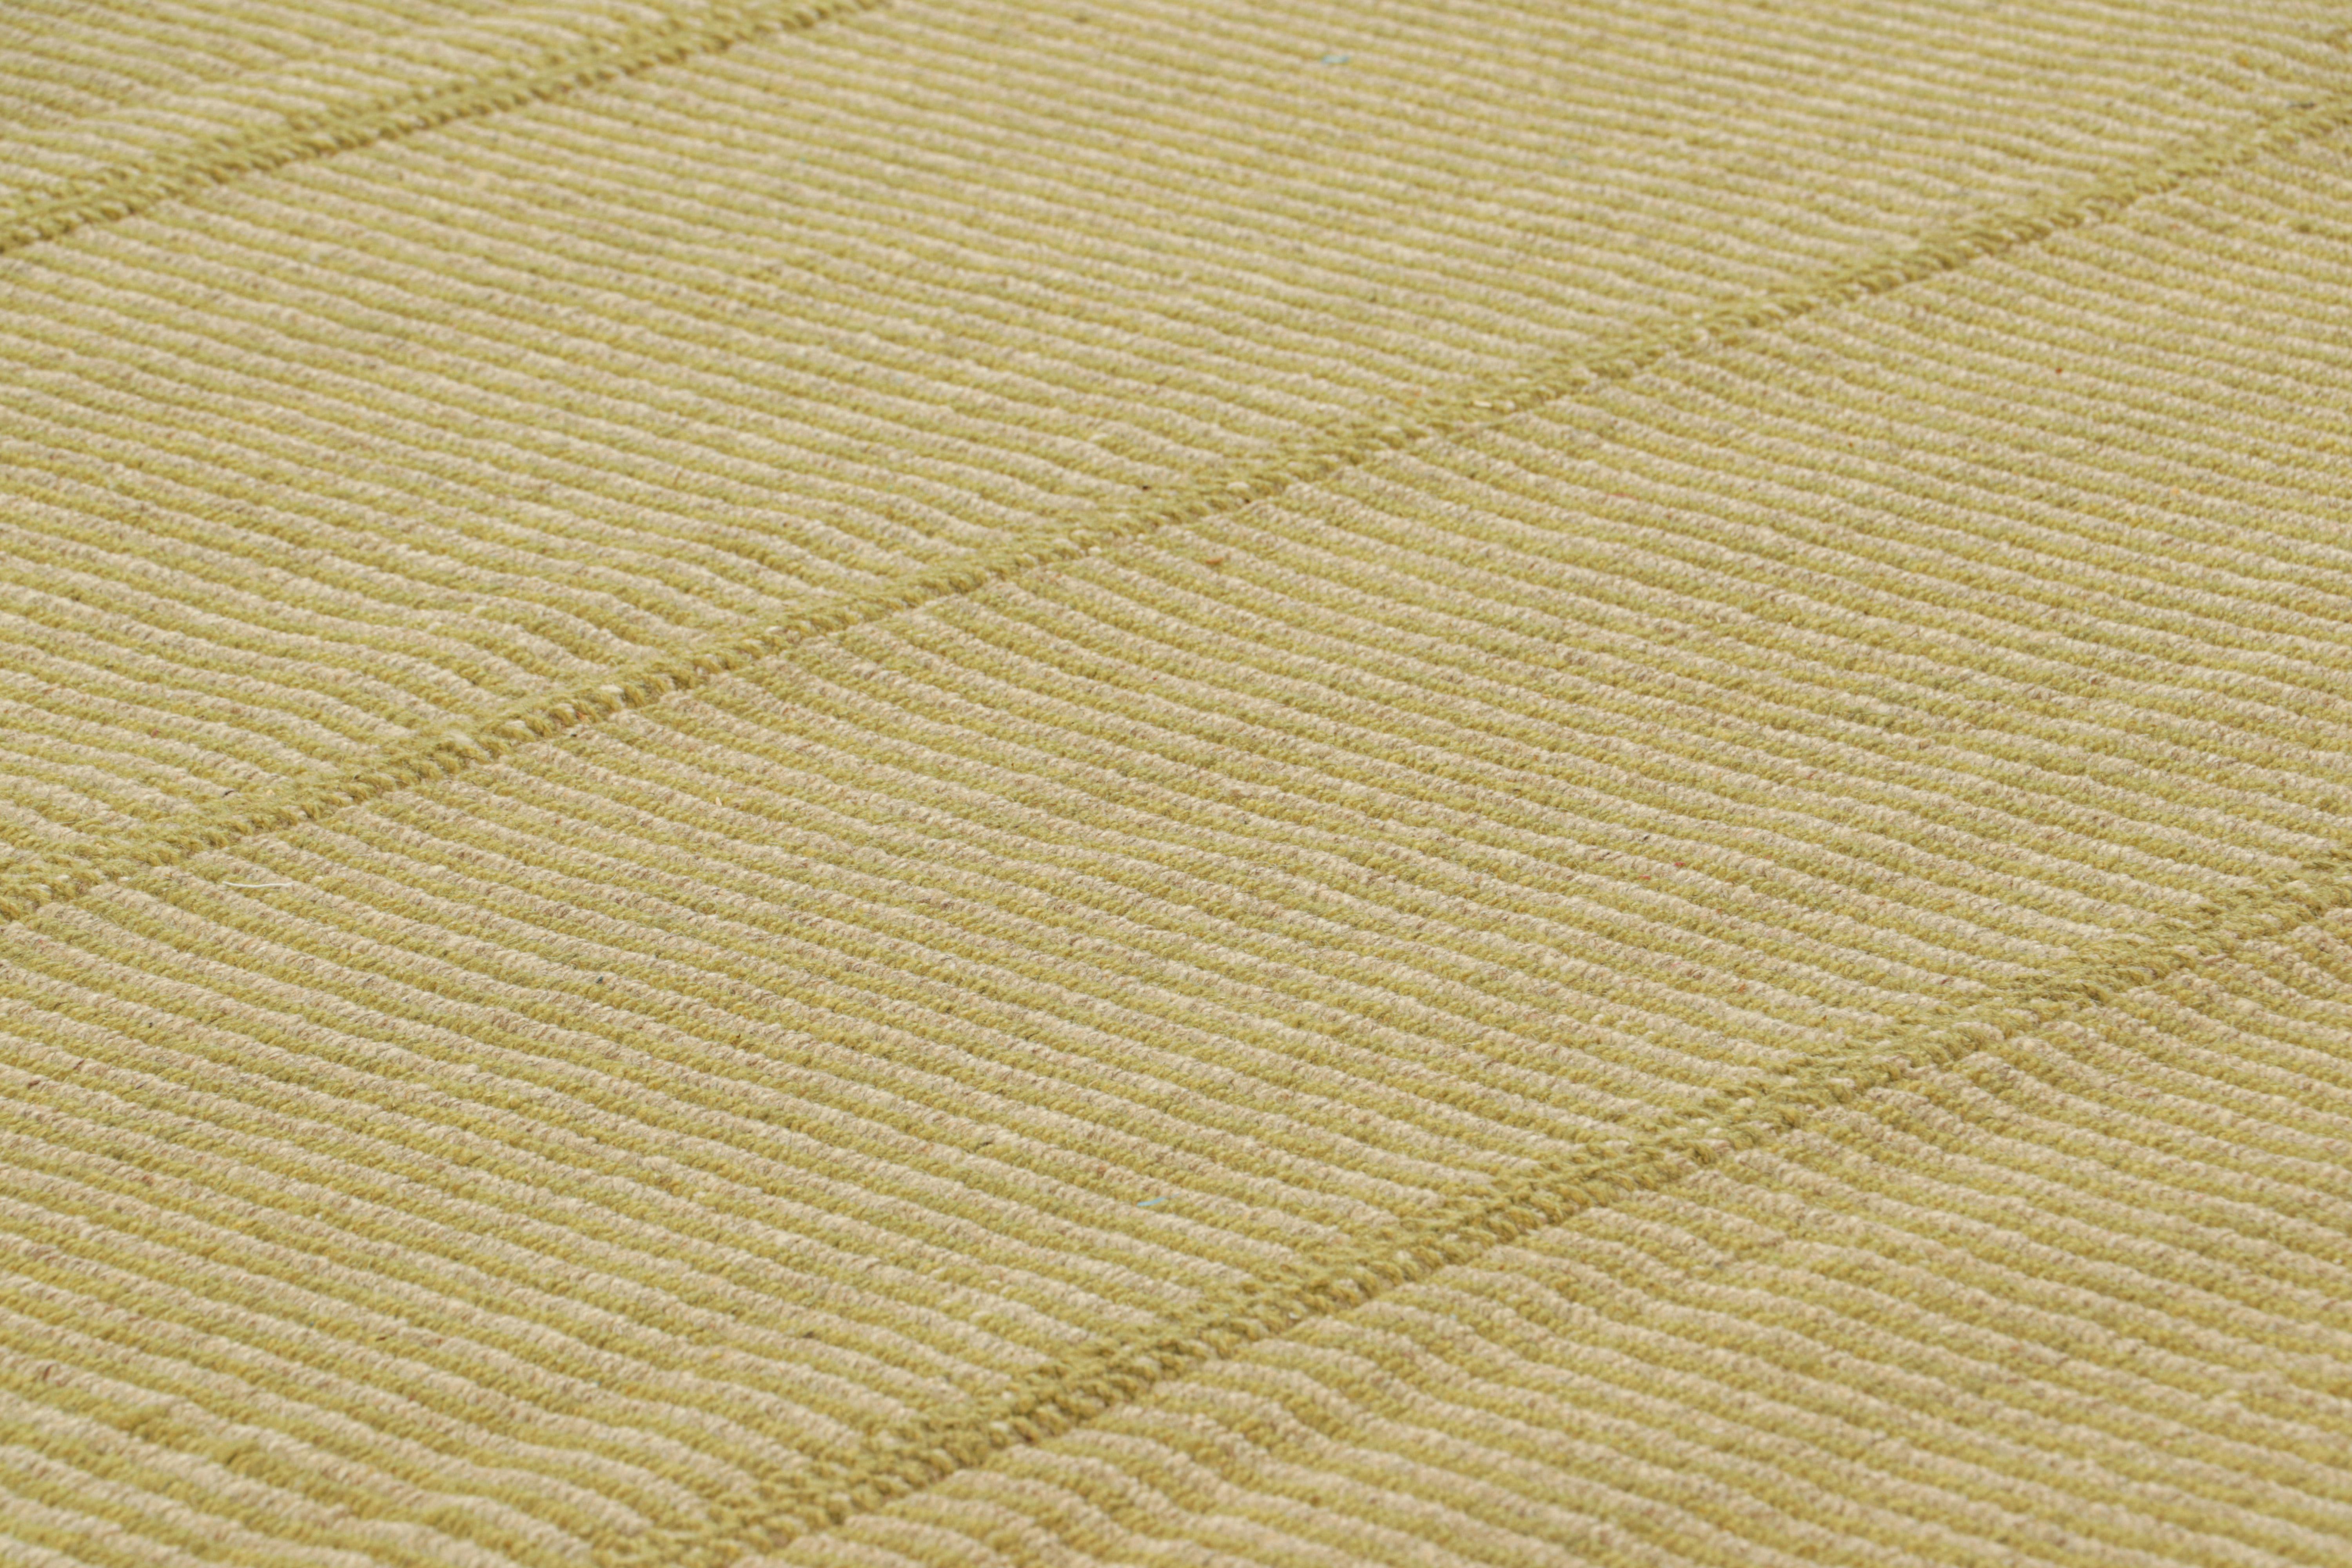 Handwoven in wool, a 10x12 Kilim design from an inventive new contemporary flat weave collection by Rug & Kilim.

On the Design: 

Fondly dubbed, “Rez Kilims”, this modern take on classic panel-weaving enjoys a fabulous, unique play of gold and